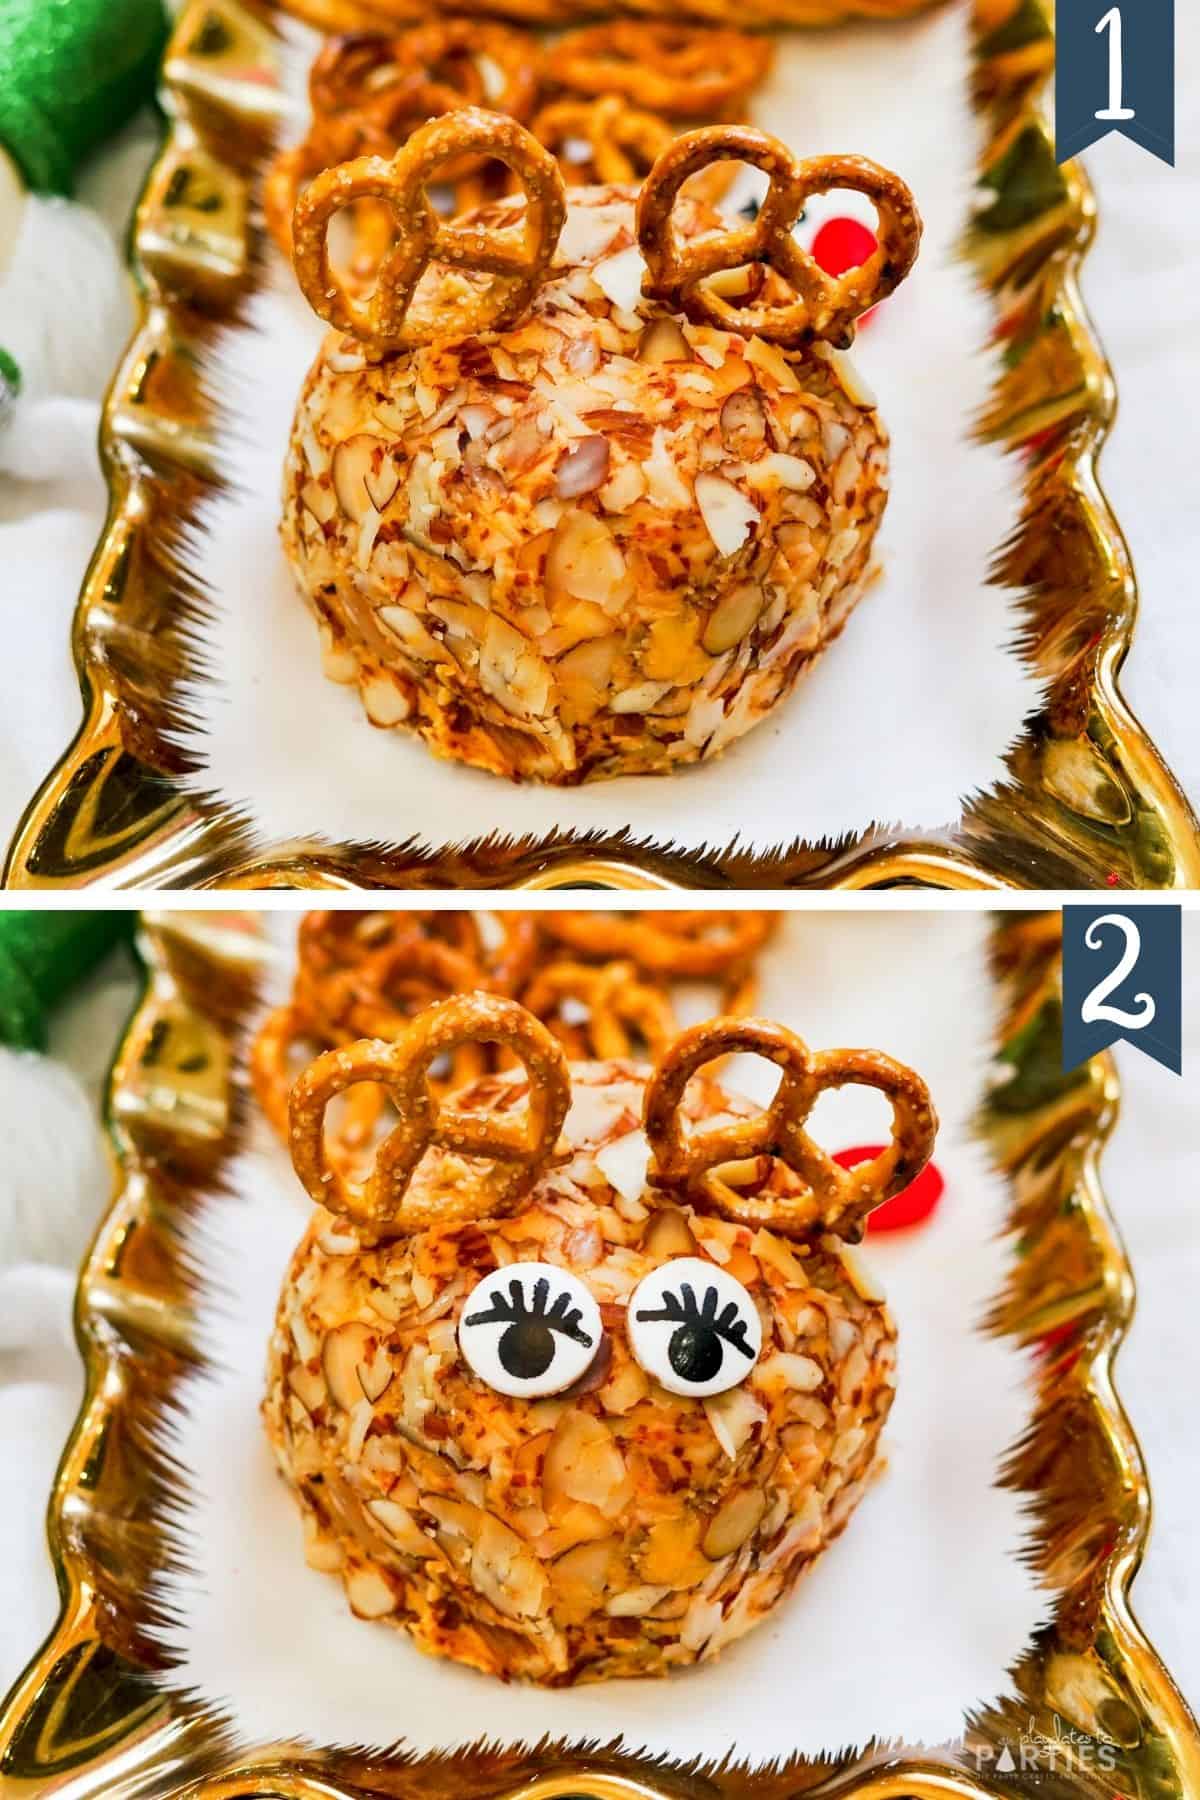 Adding pretzels and candy eyes to a cheese ball.